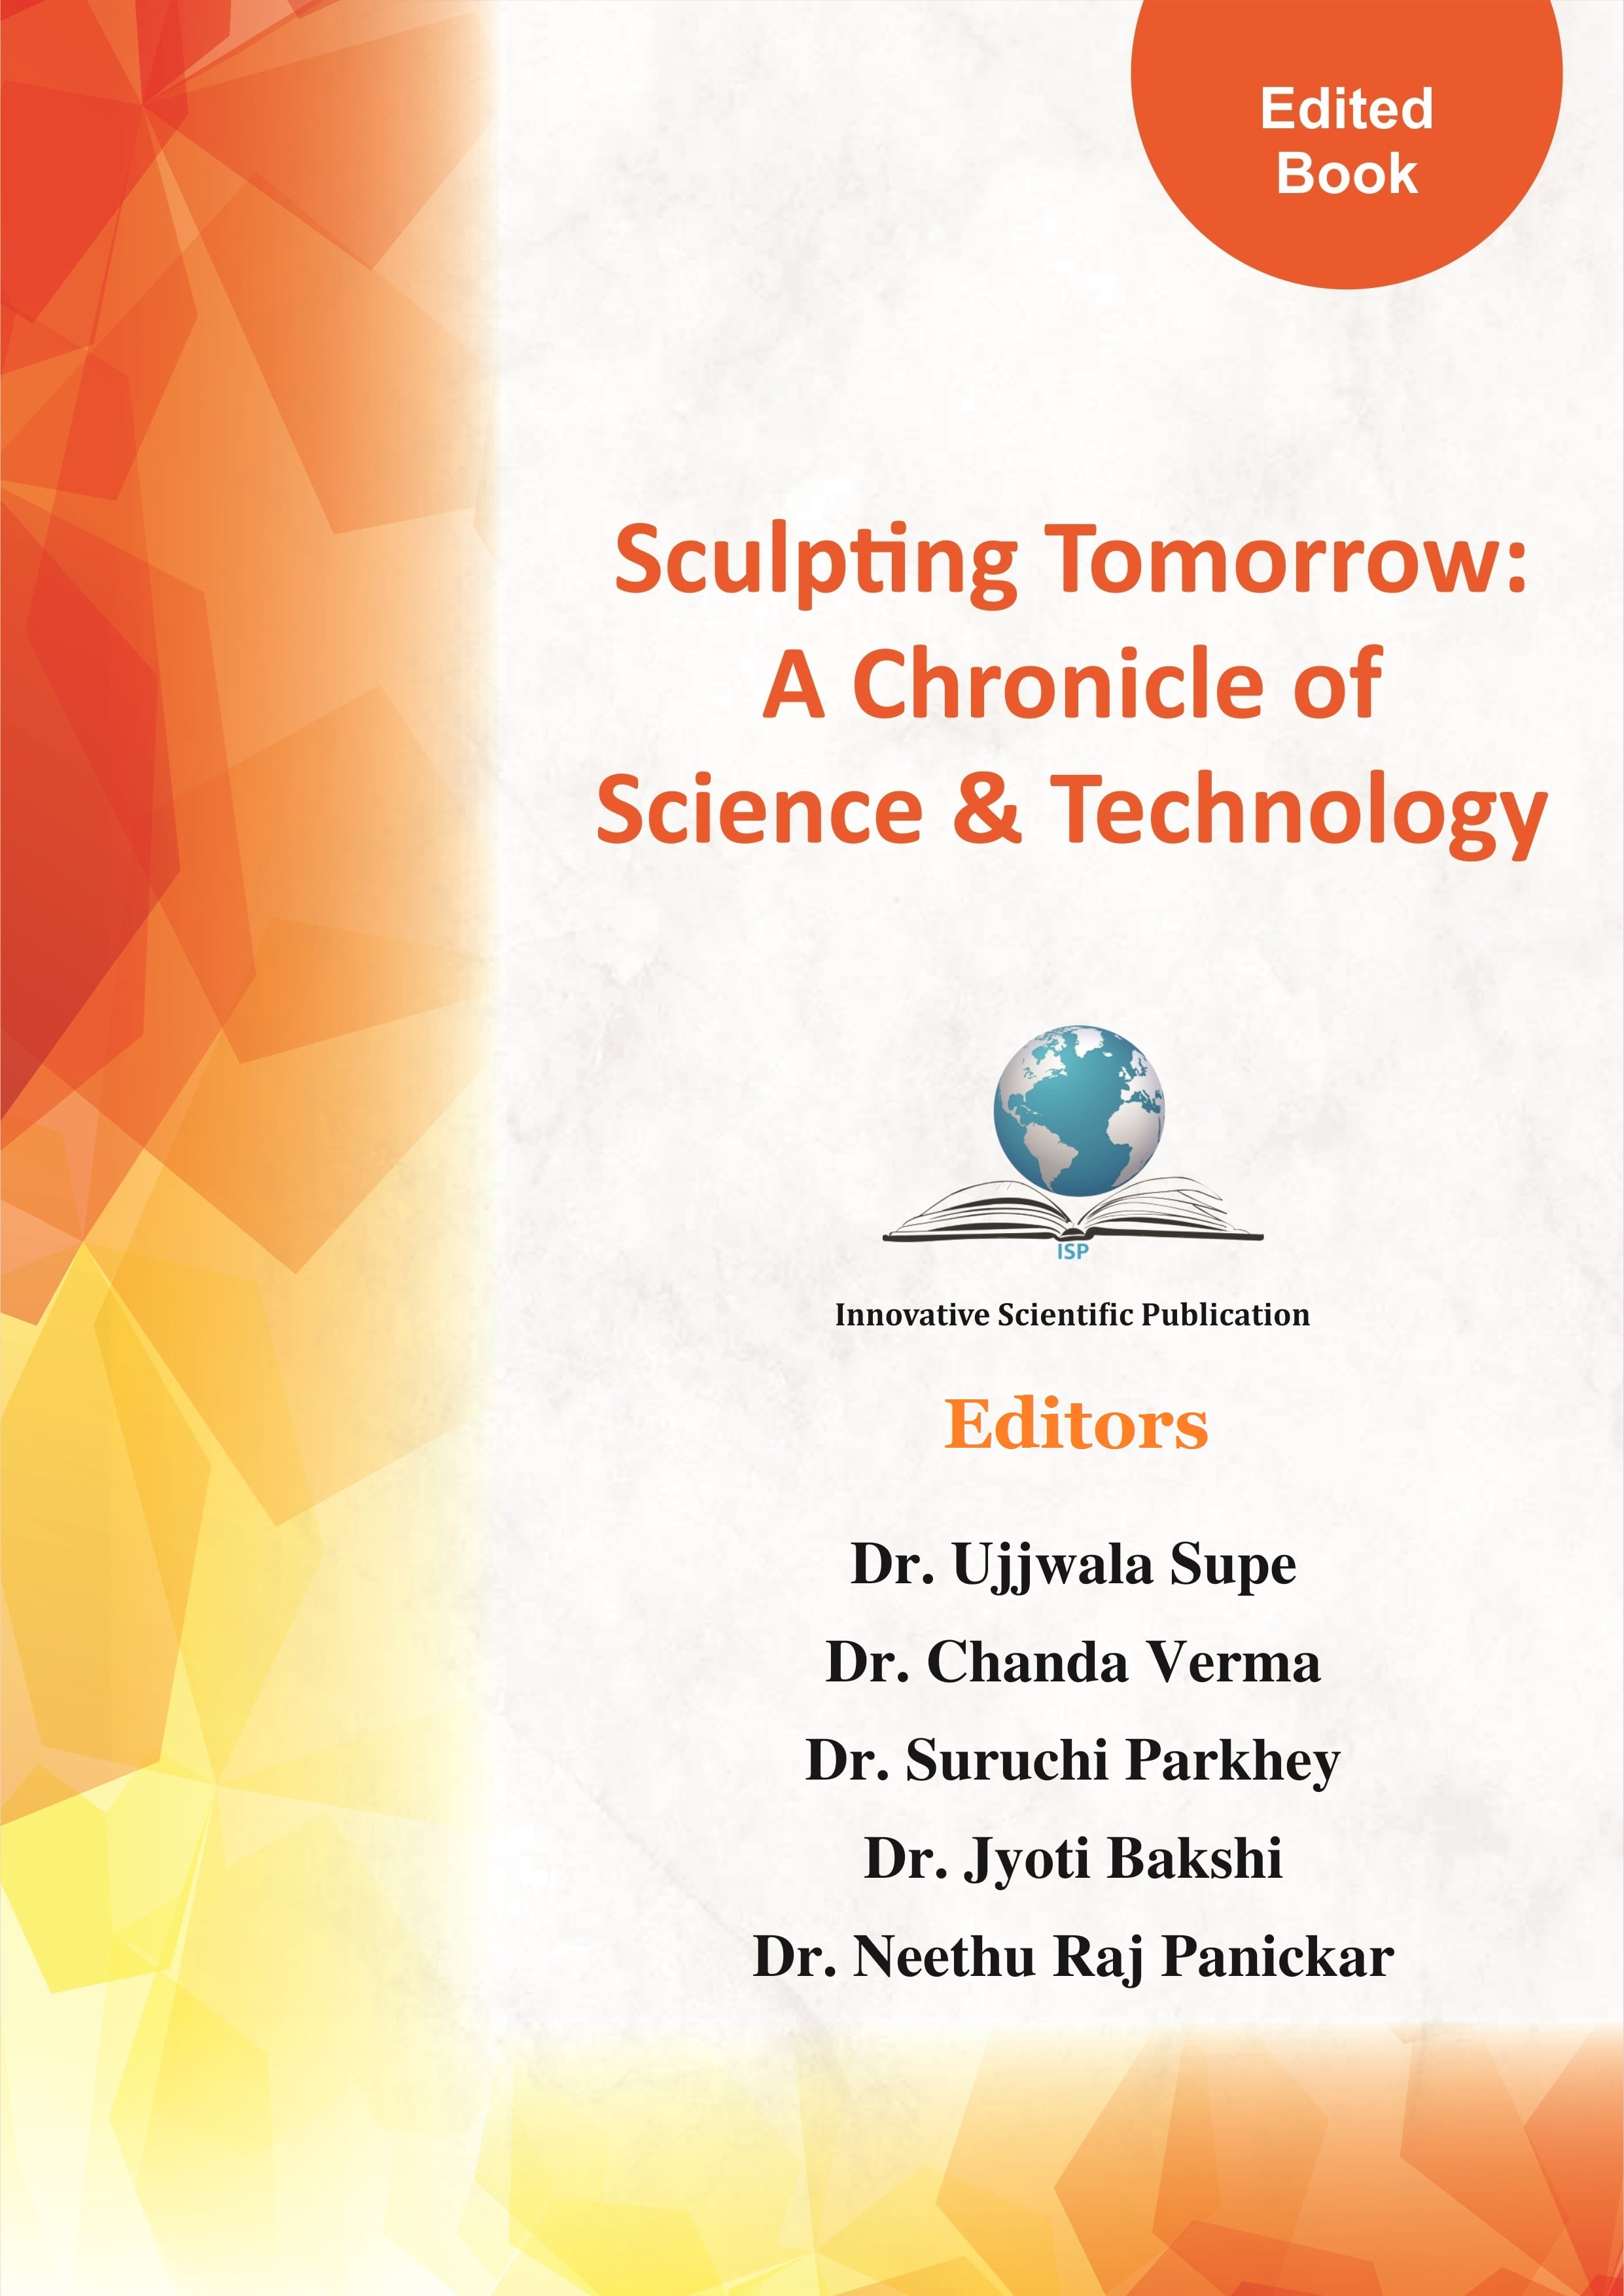 Sculpting Tomorrow A Chronicle of Science & Technology-min.jpg